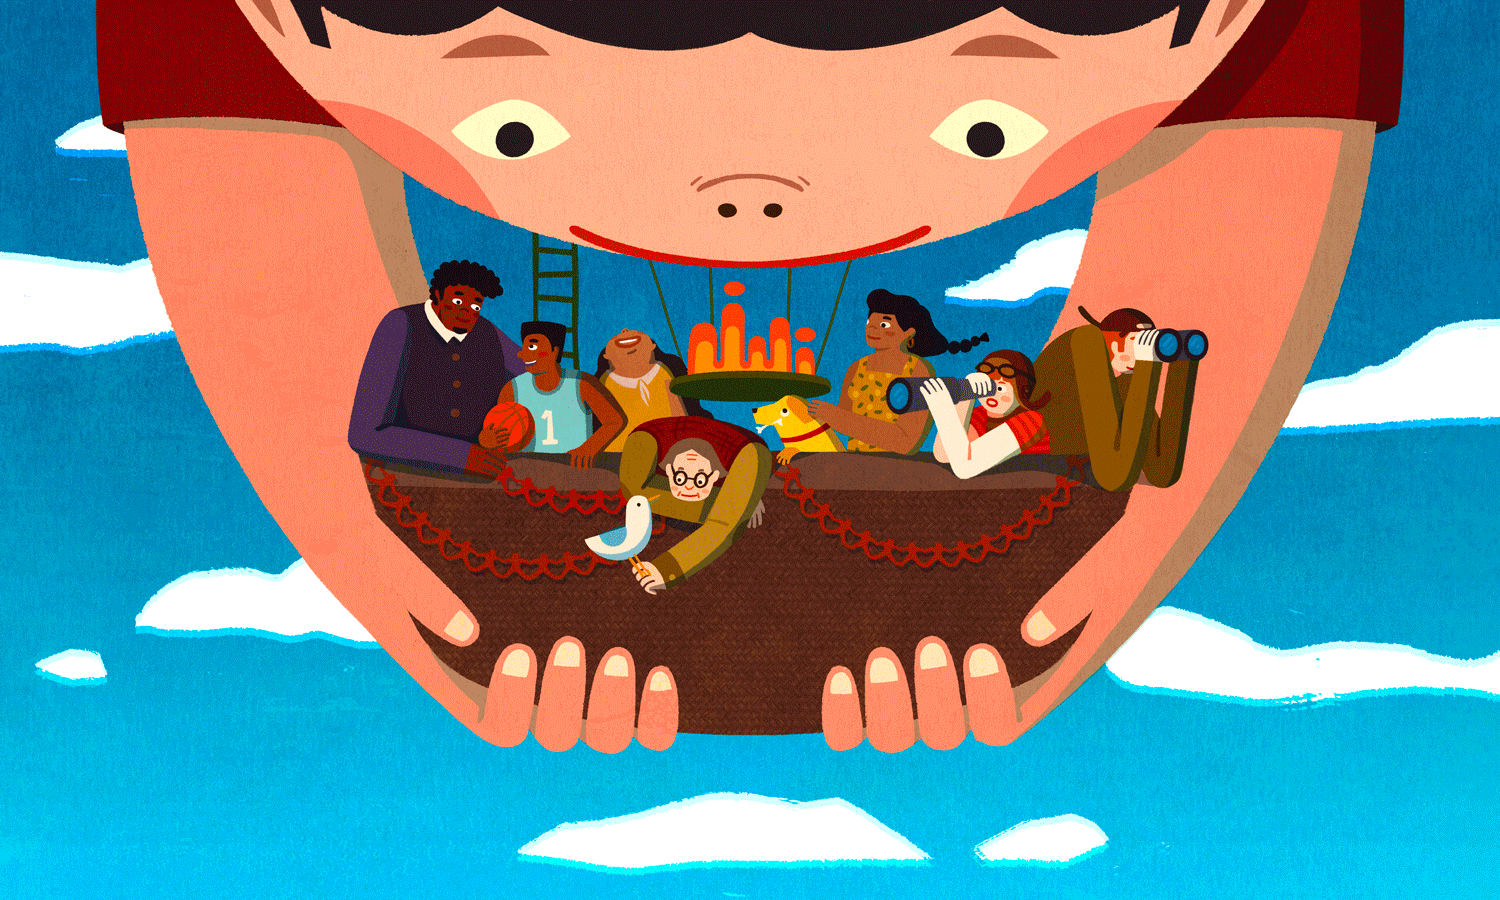 illustration of boy looking down from the sky and holding what appears to be a boat filled with miniature people.